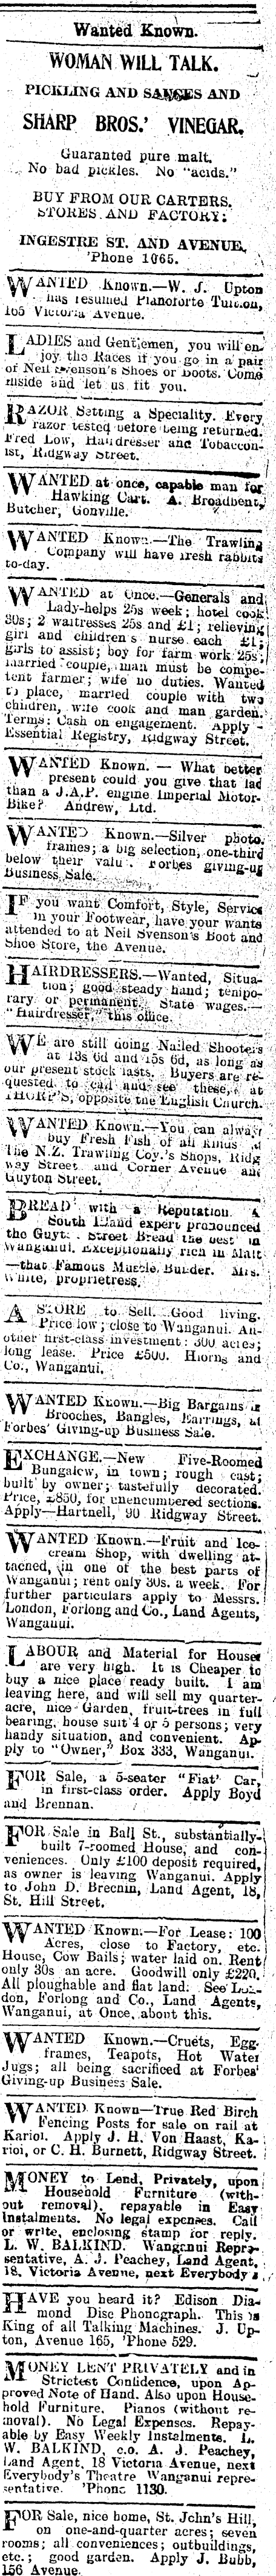 Papers Past Newspapers Wanganui Chronicle 21 February 1917 Page 1 Advertisements Column 8